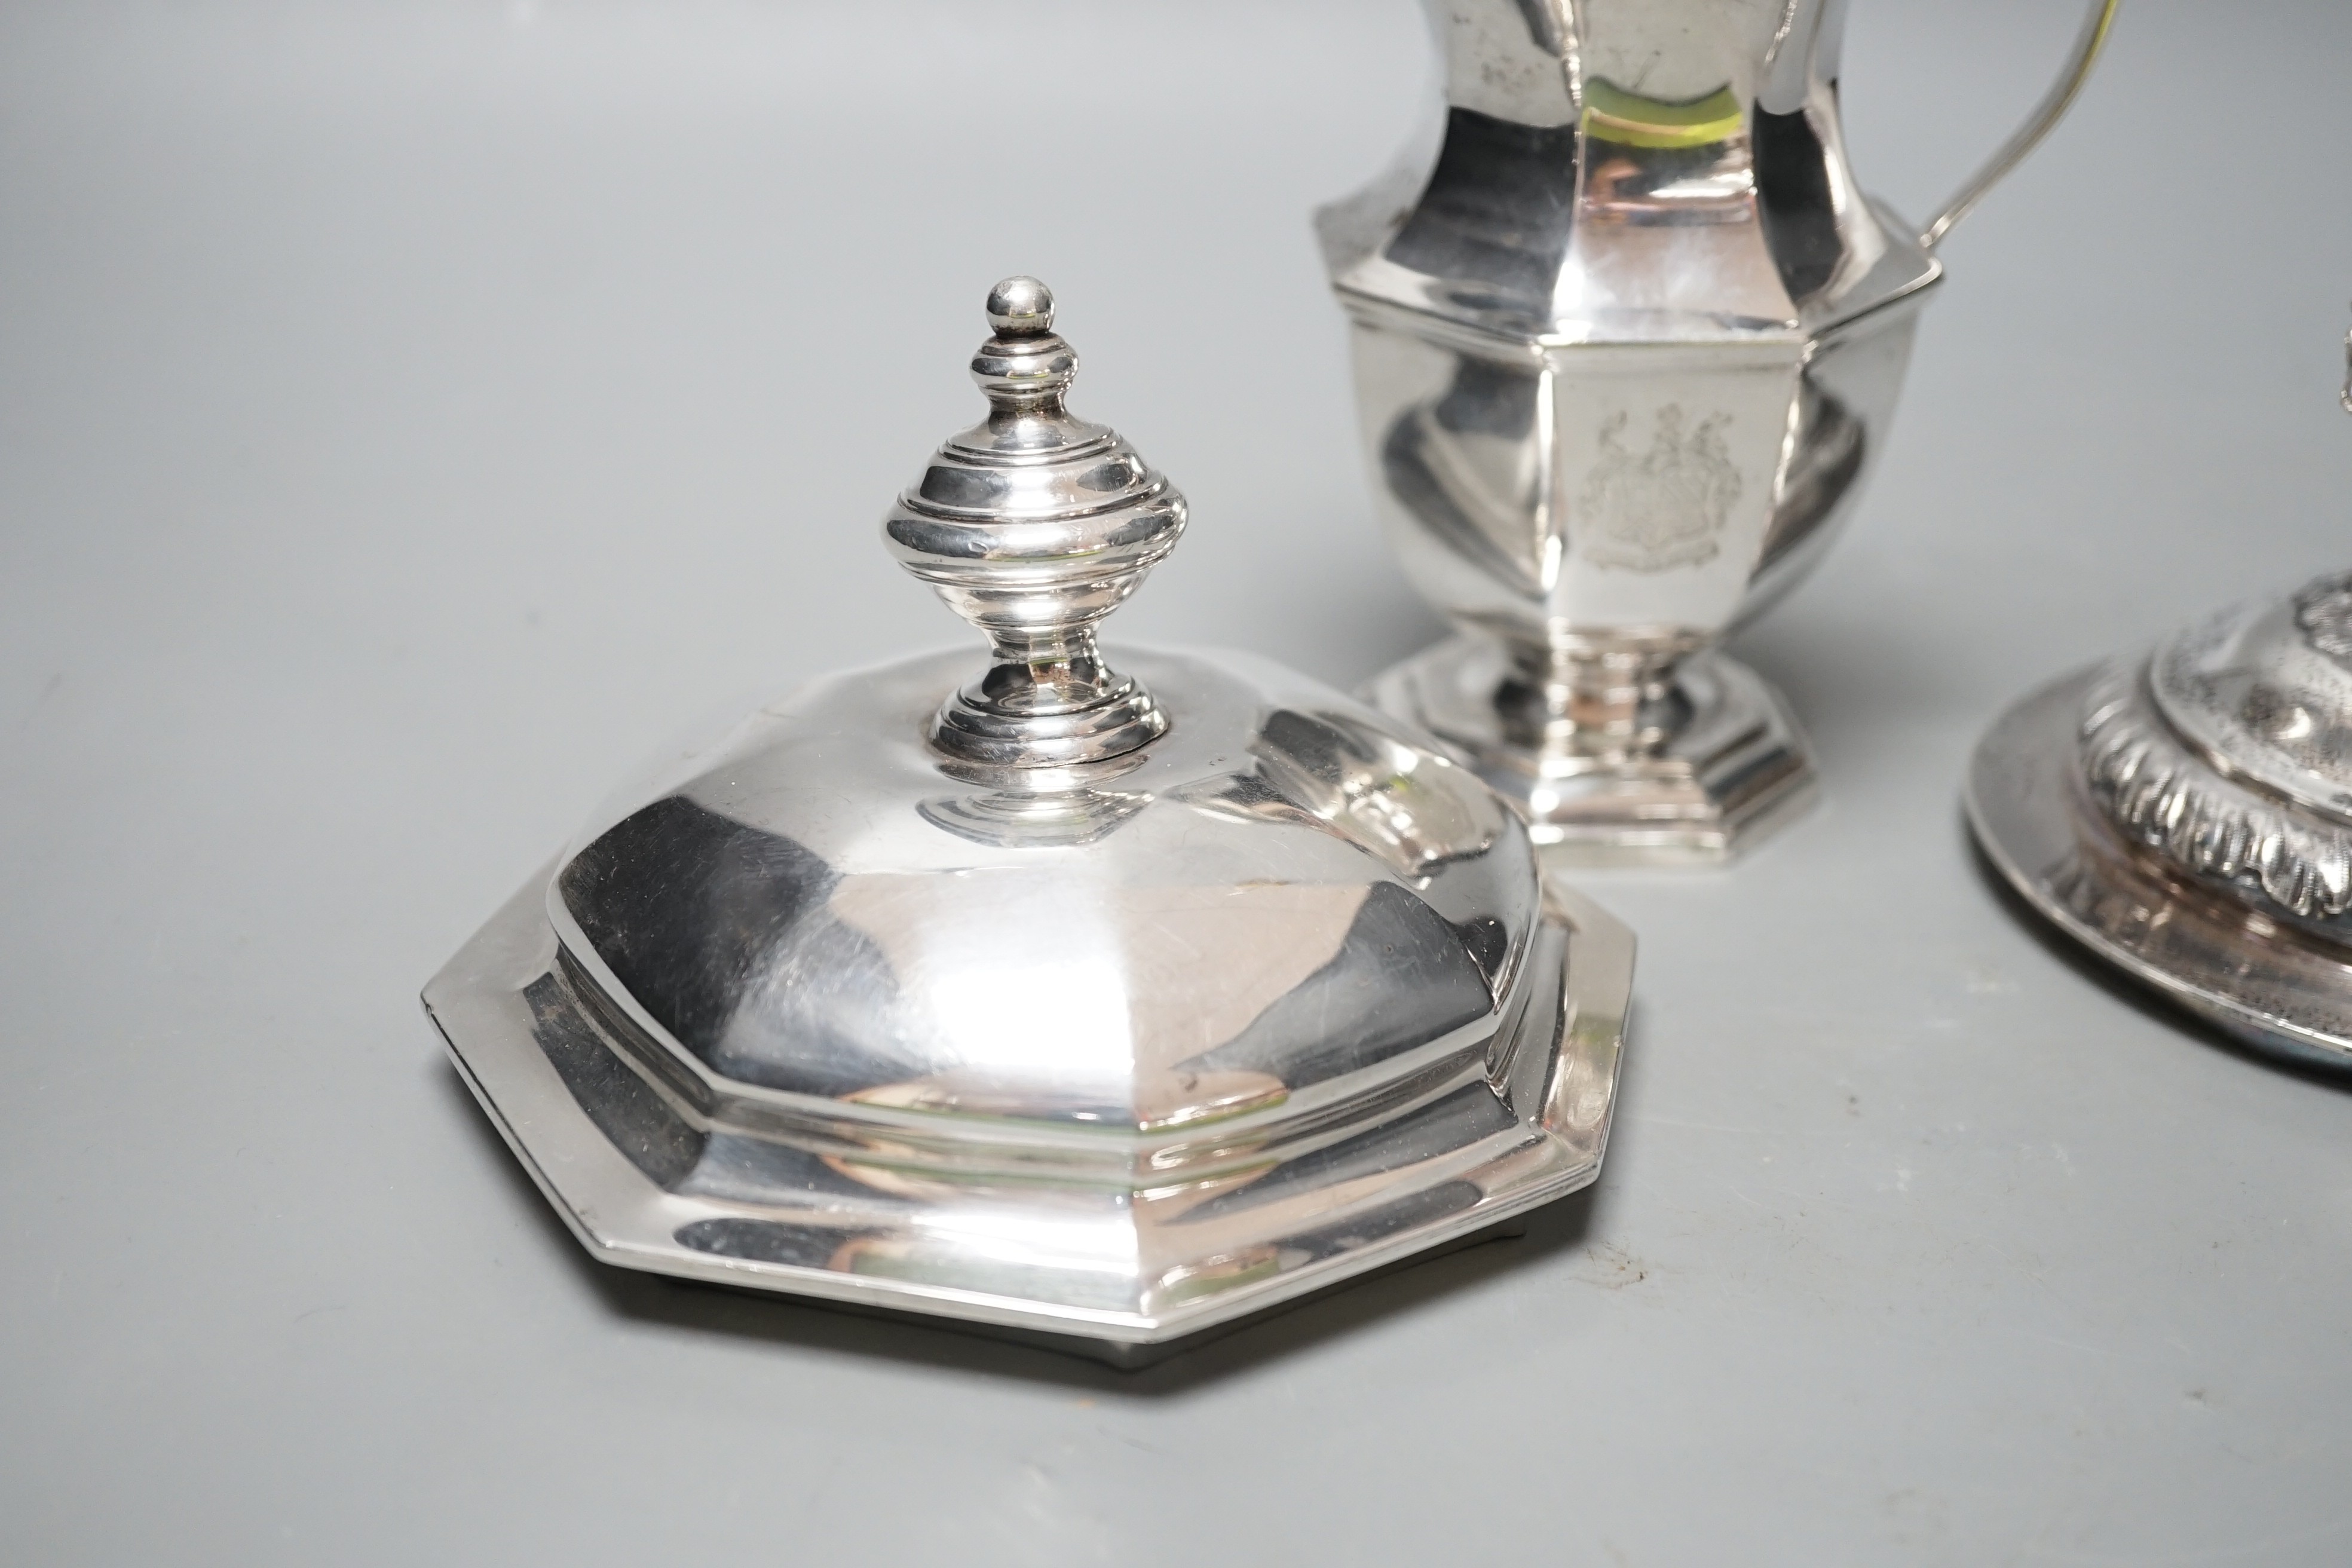 A 20th century silver cream jug by Mappin & Webb(date letter rubbed), height 13.9cm and two Victorian trophy cup covers, one with sheep finial, 24.8oz.